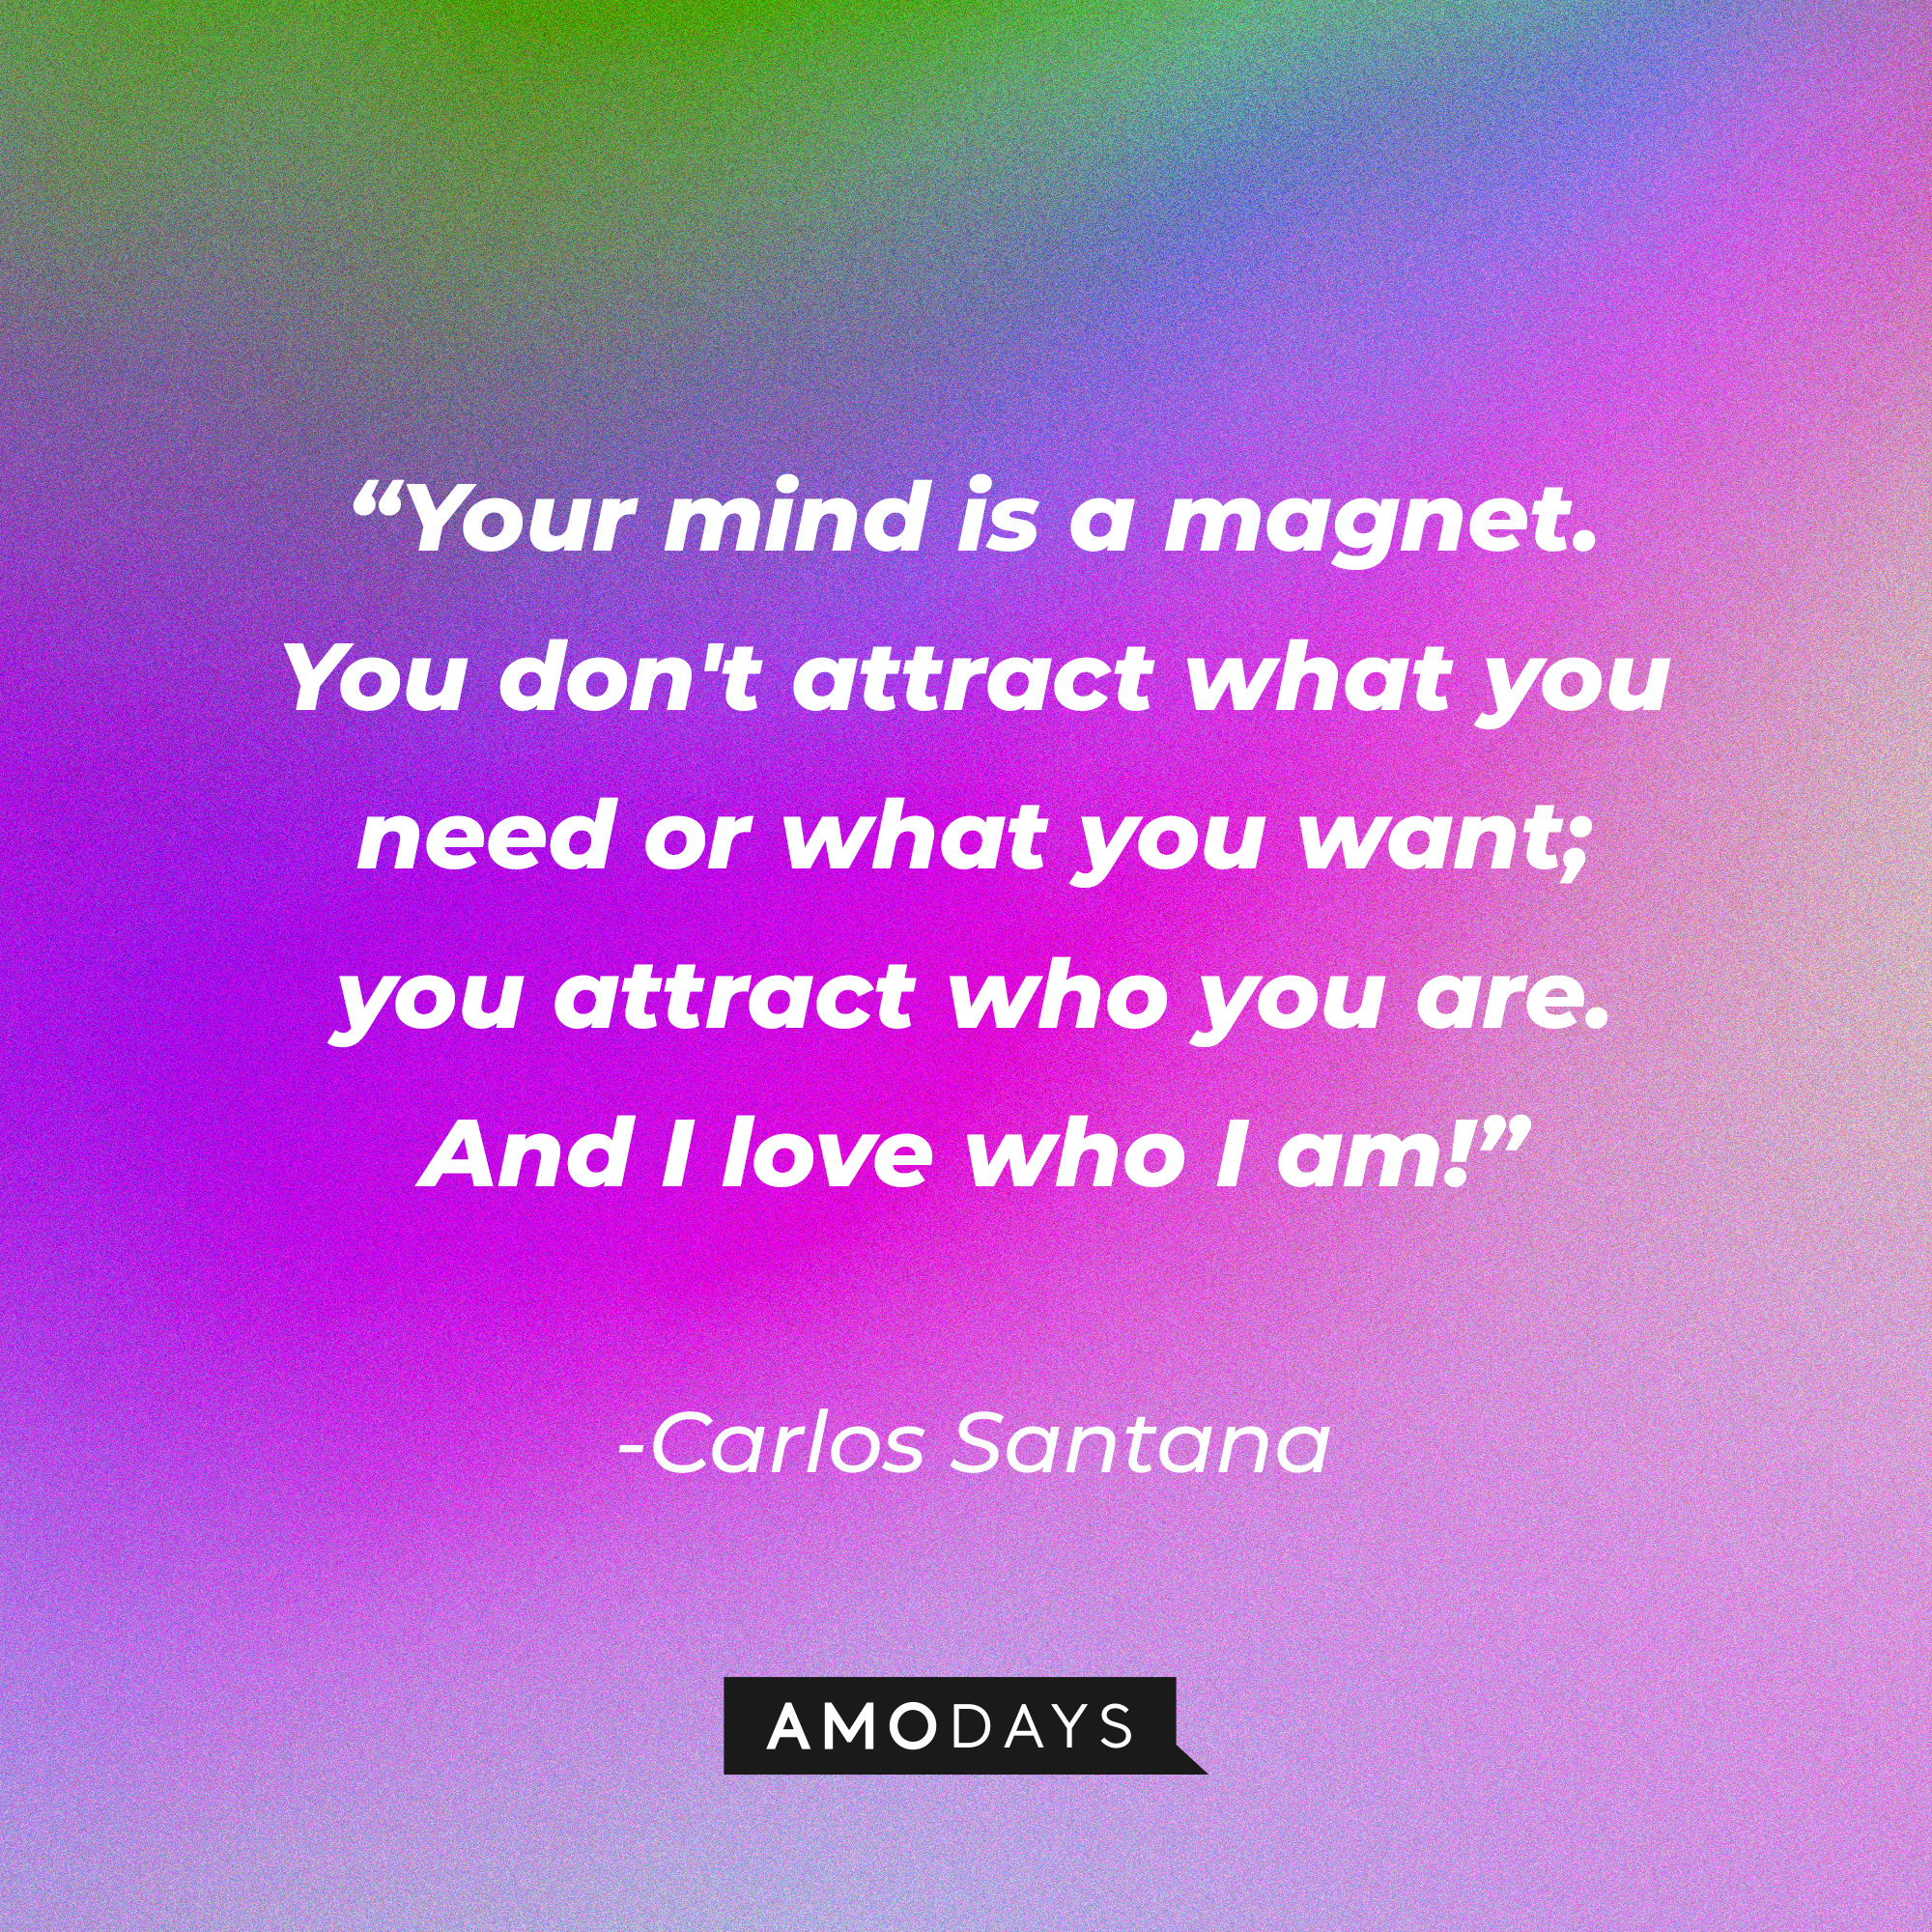 Carlos Santana’s quote: “Your mind is a magnet. You don't attract what you need or what you want; you attract who you are. And I love who I am!”┃Source: AmoDays